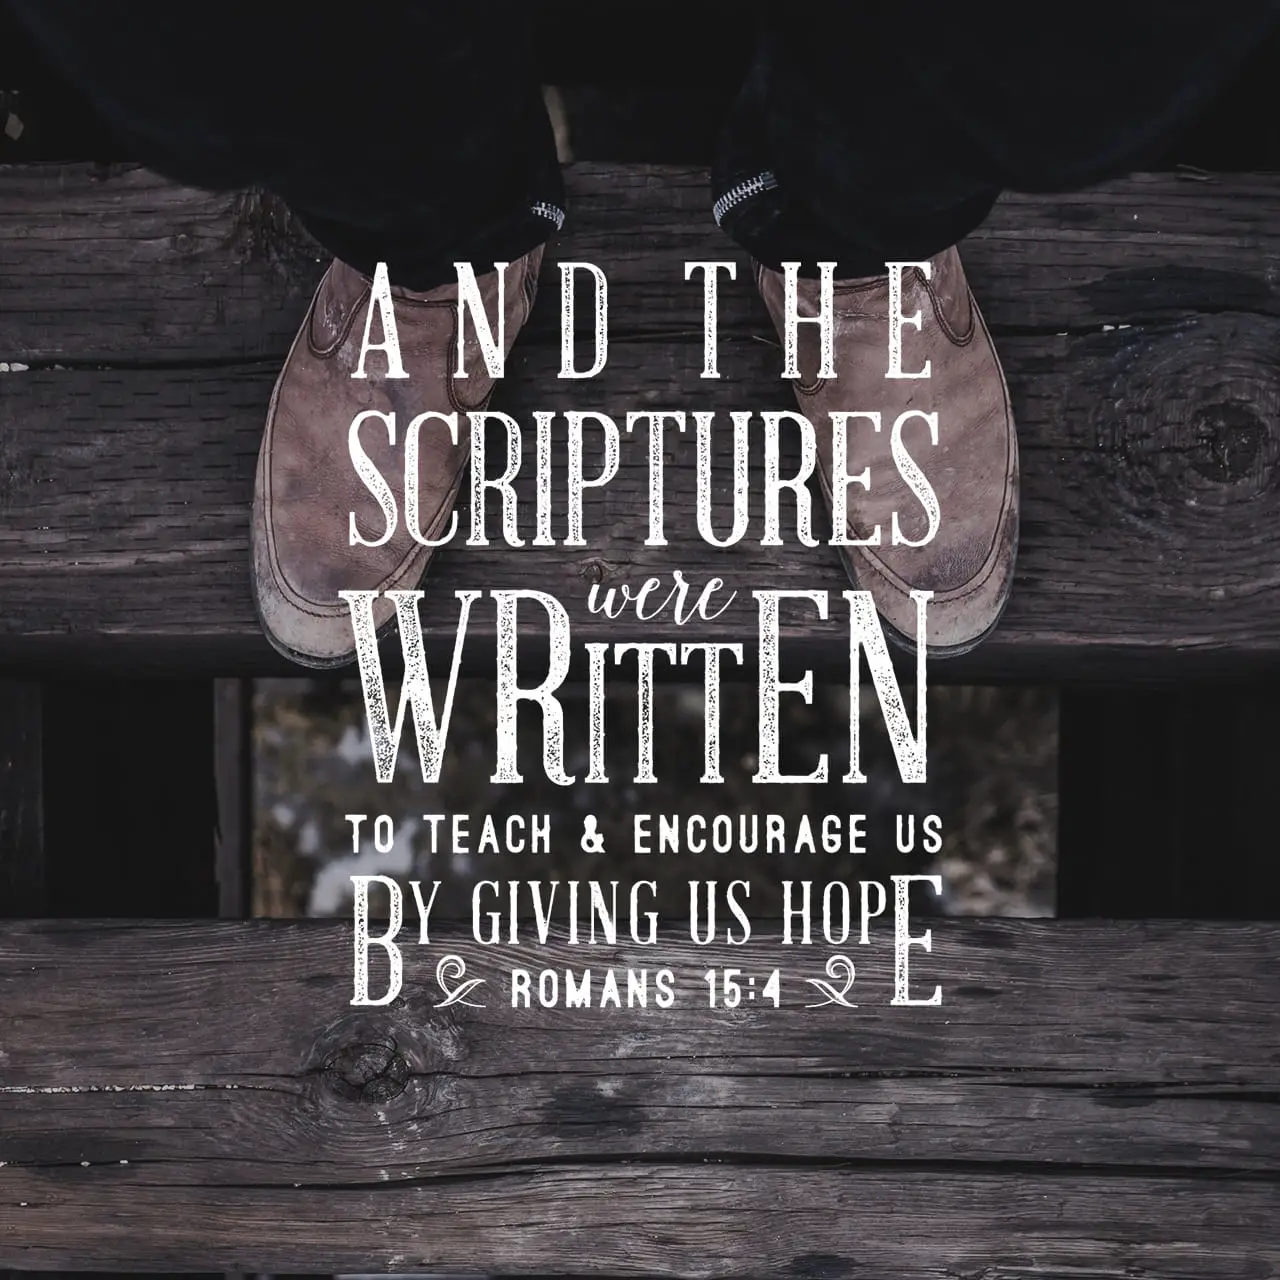 The Scriptures Give us Hope - Romans 15:4